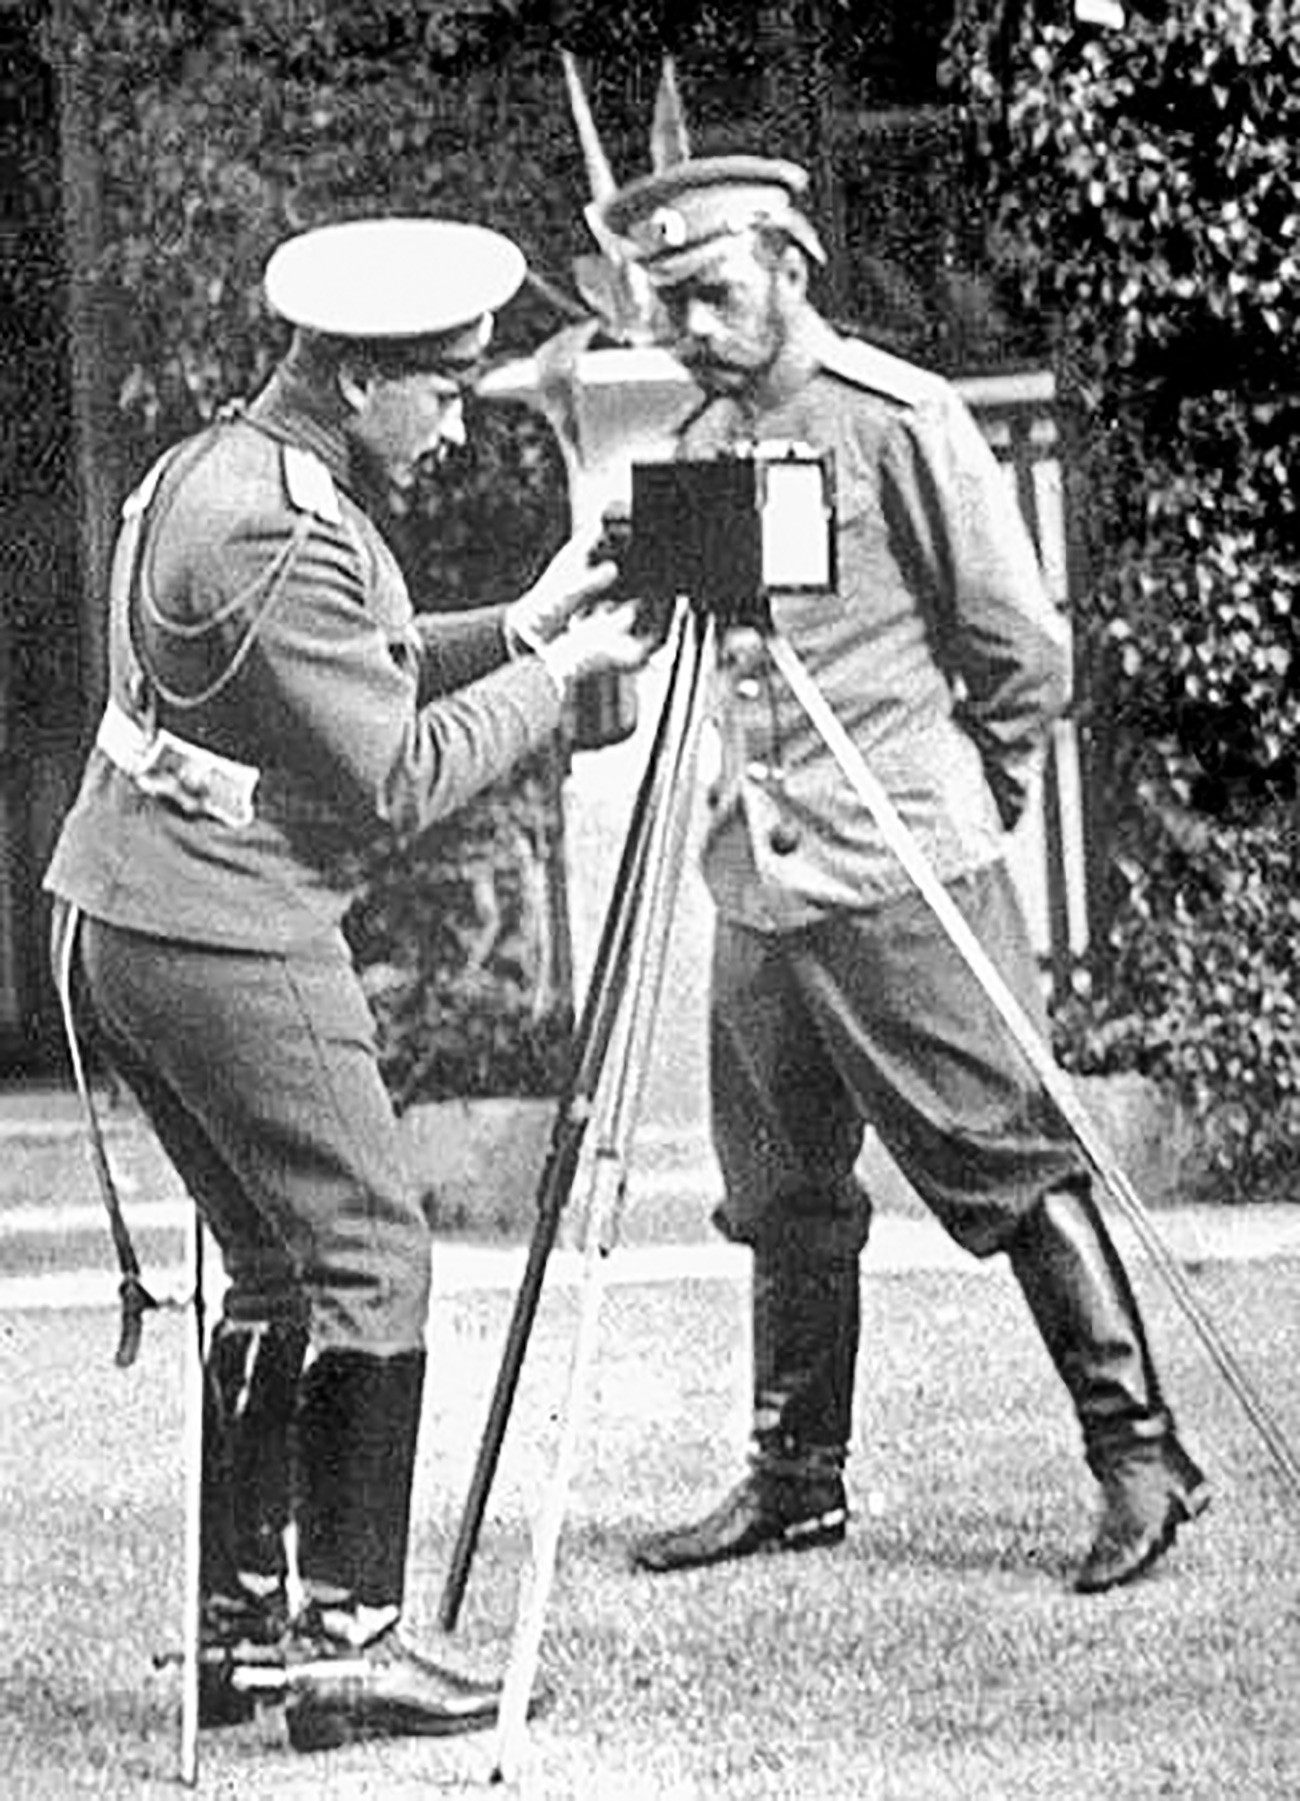 Nicholas II watches as his camera is being placed on a tripod